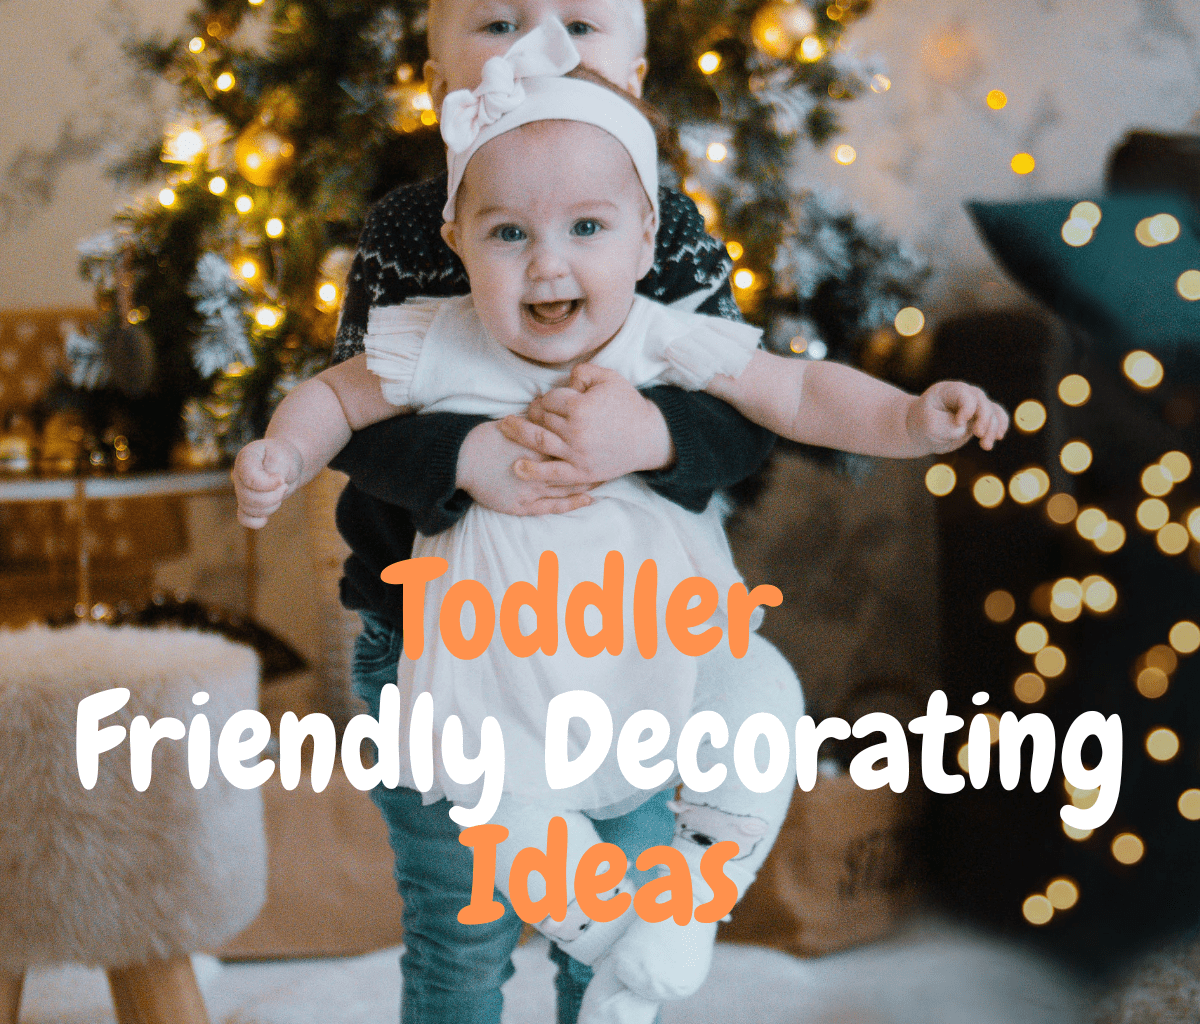 Toddler Friendly Decorating Ideas: Creating a Safe and Playful Haven for Little Ones